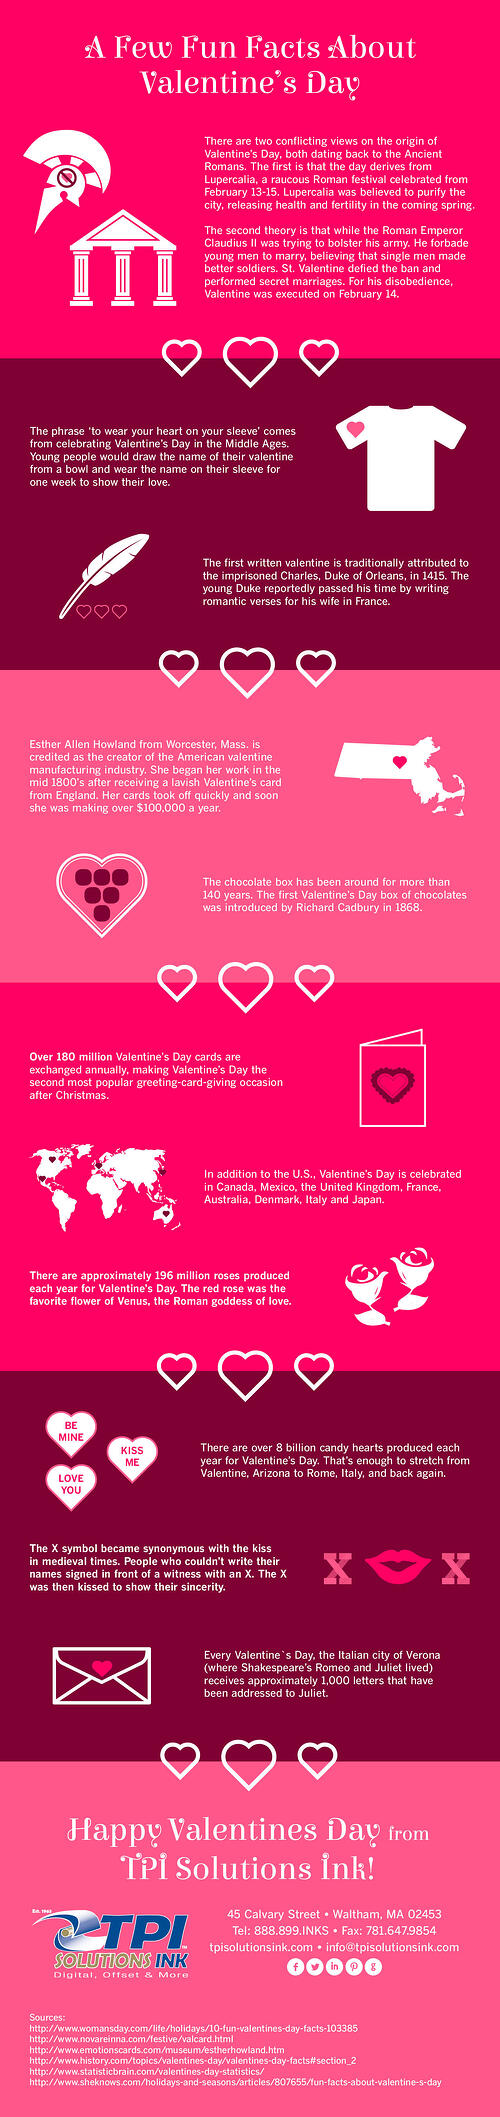 Valentine's Day Fun Facts Infographic by TPI Solutions Ink #infographic #valentines